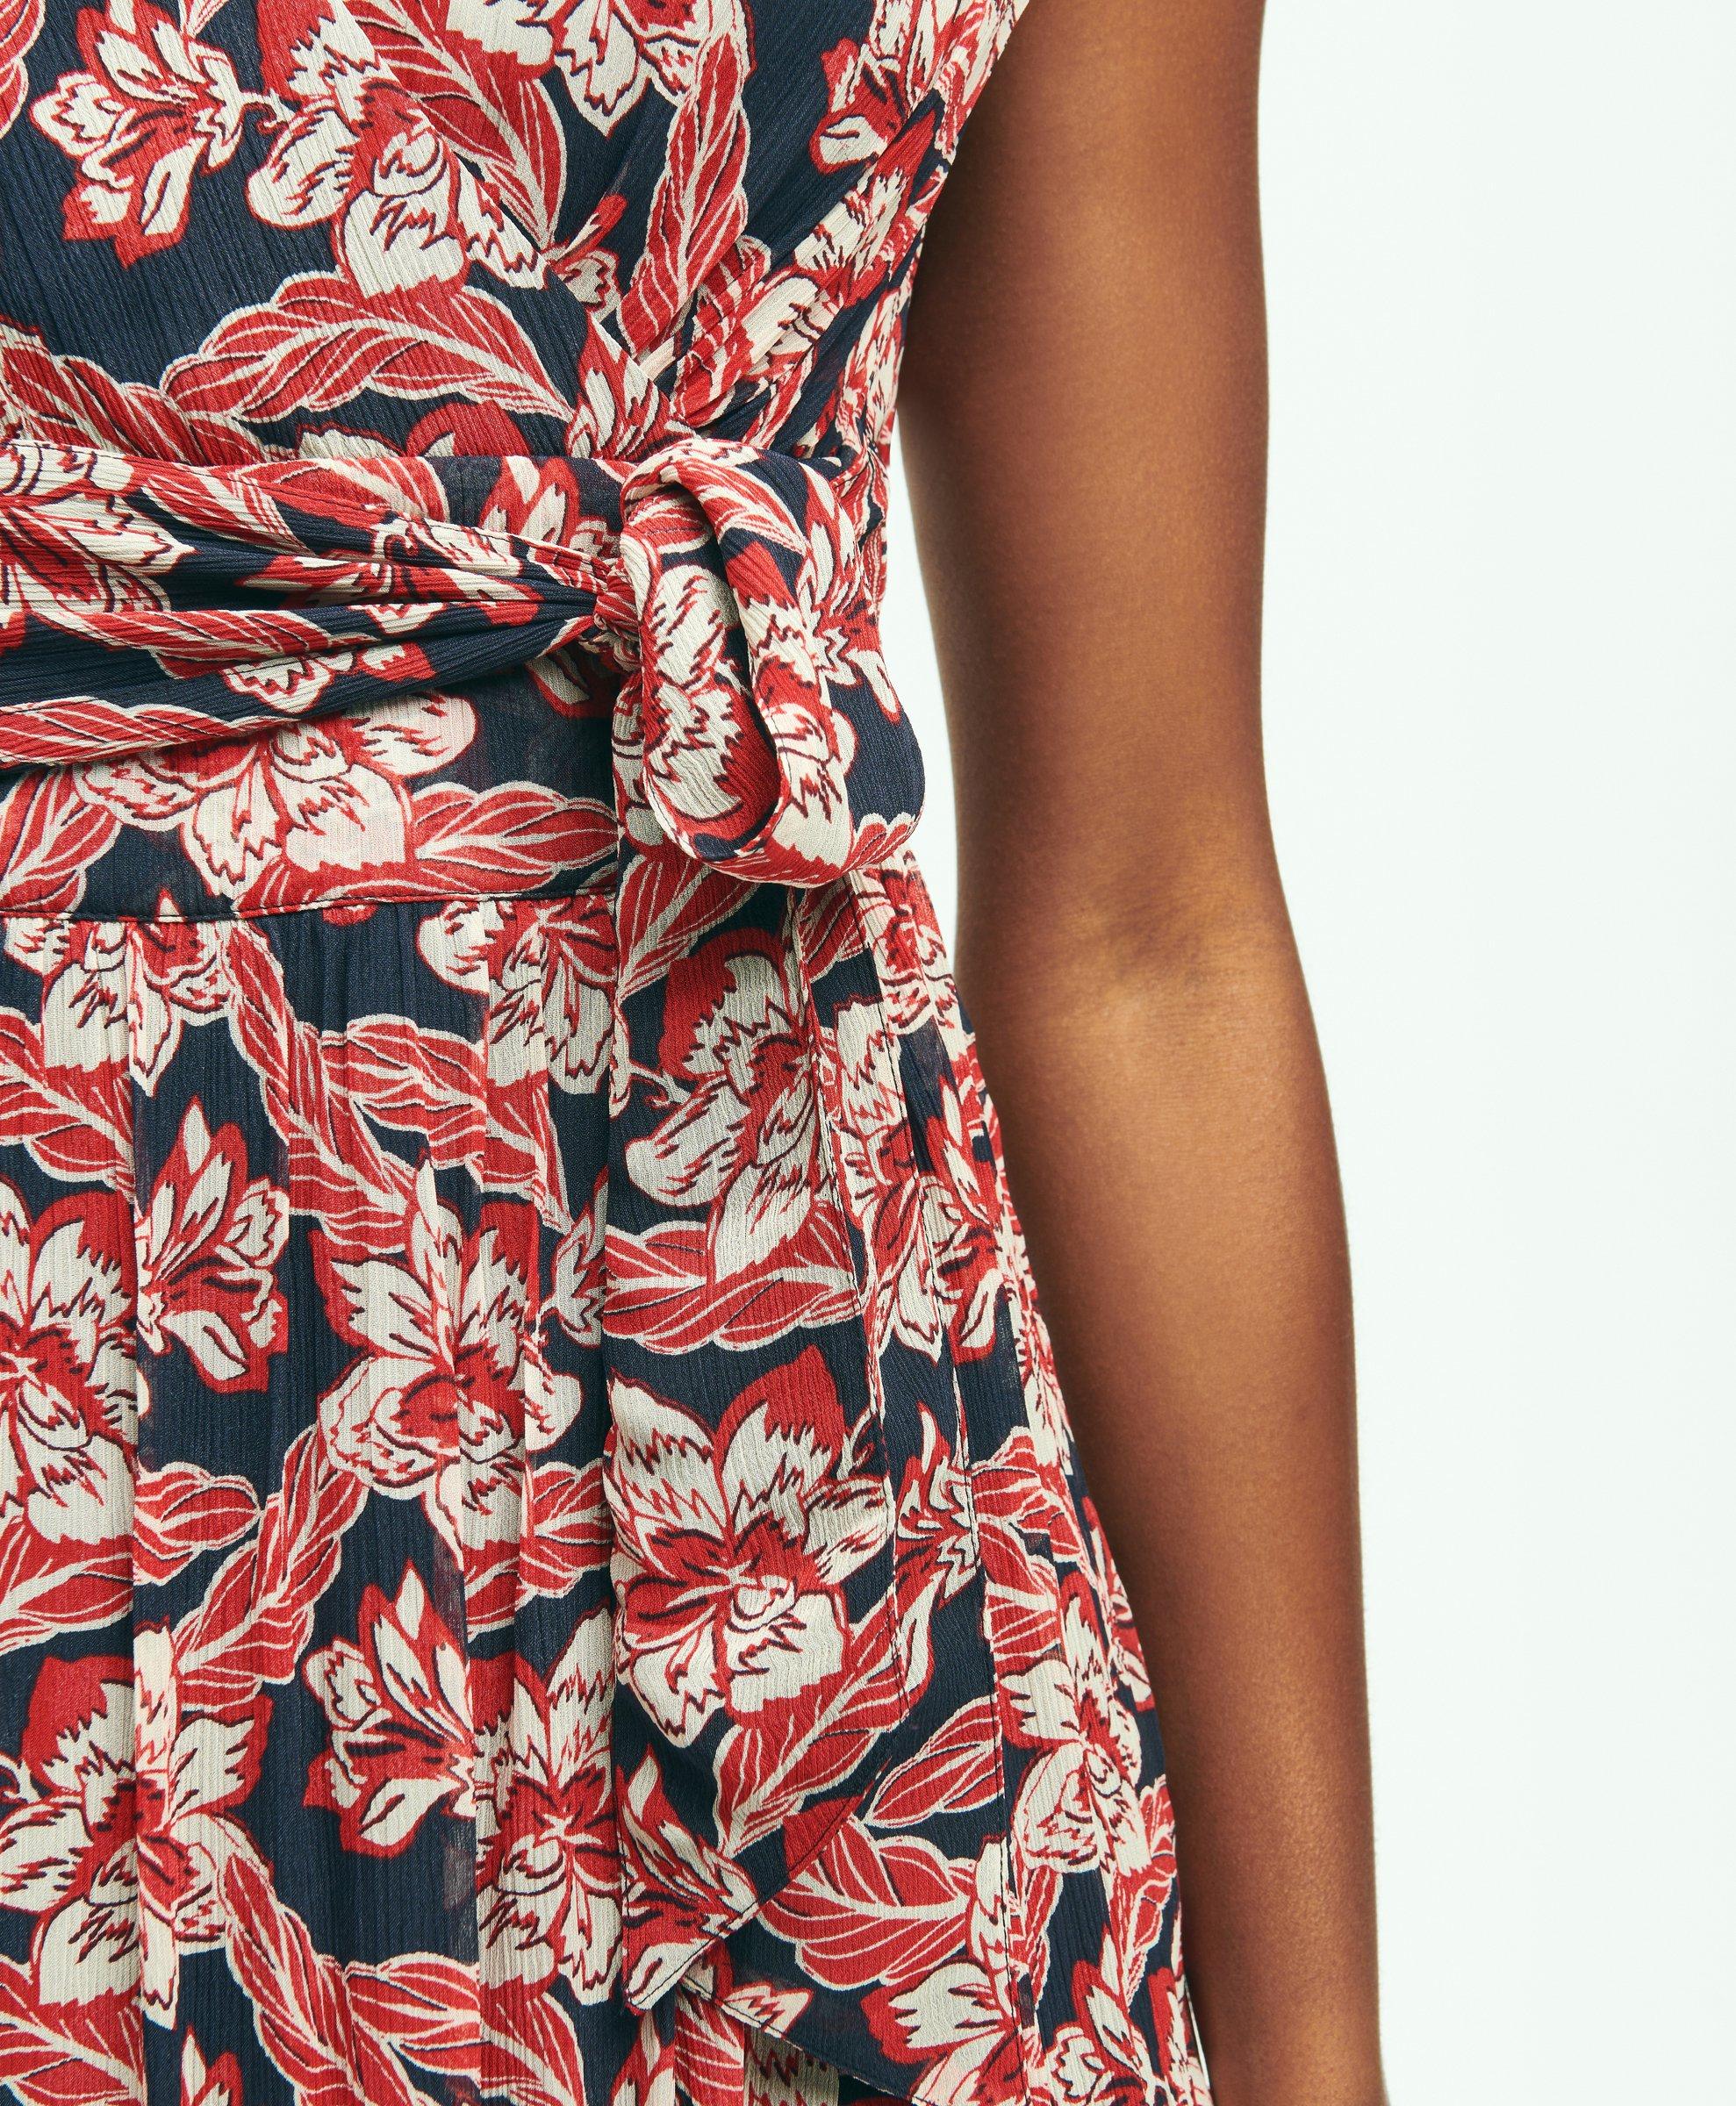 ASOS EDITION cotton twill button front midi dress in red floral print